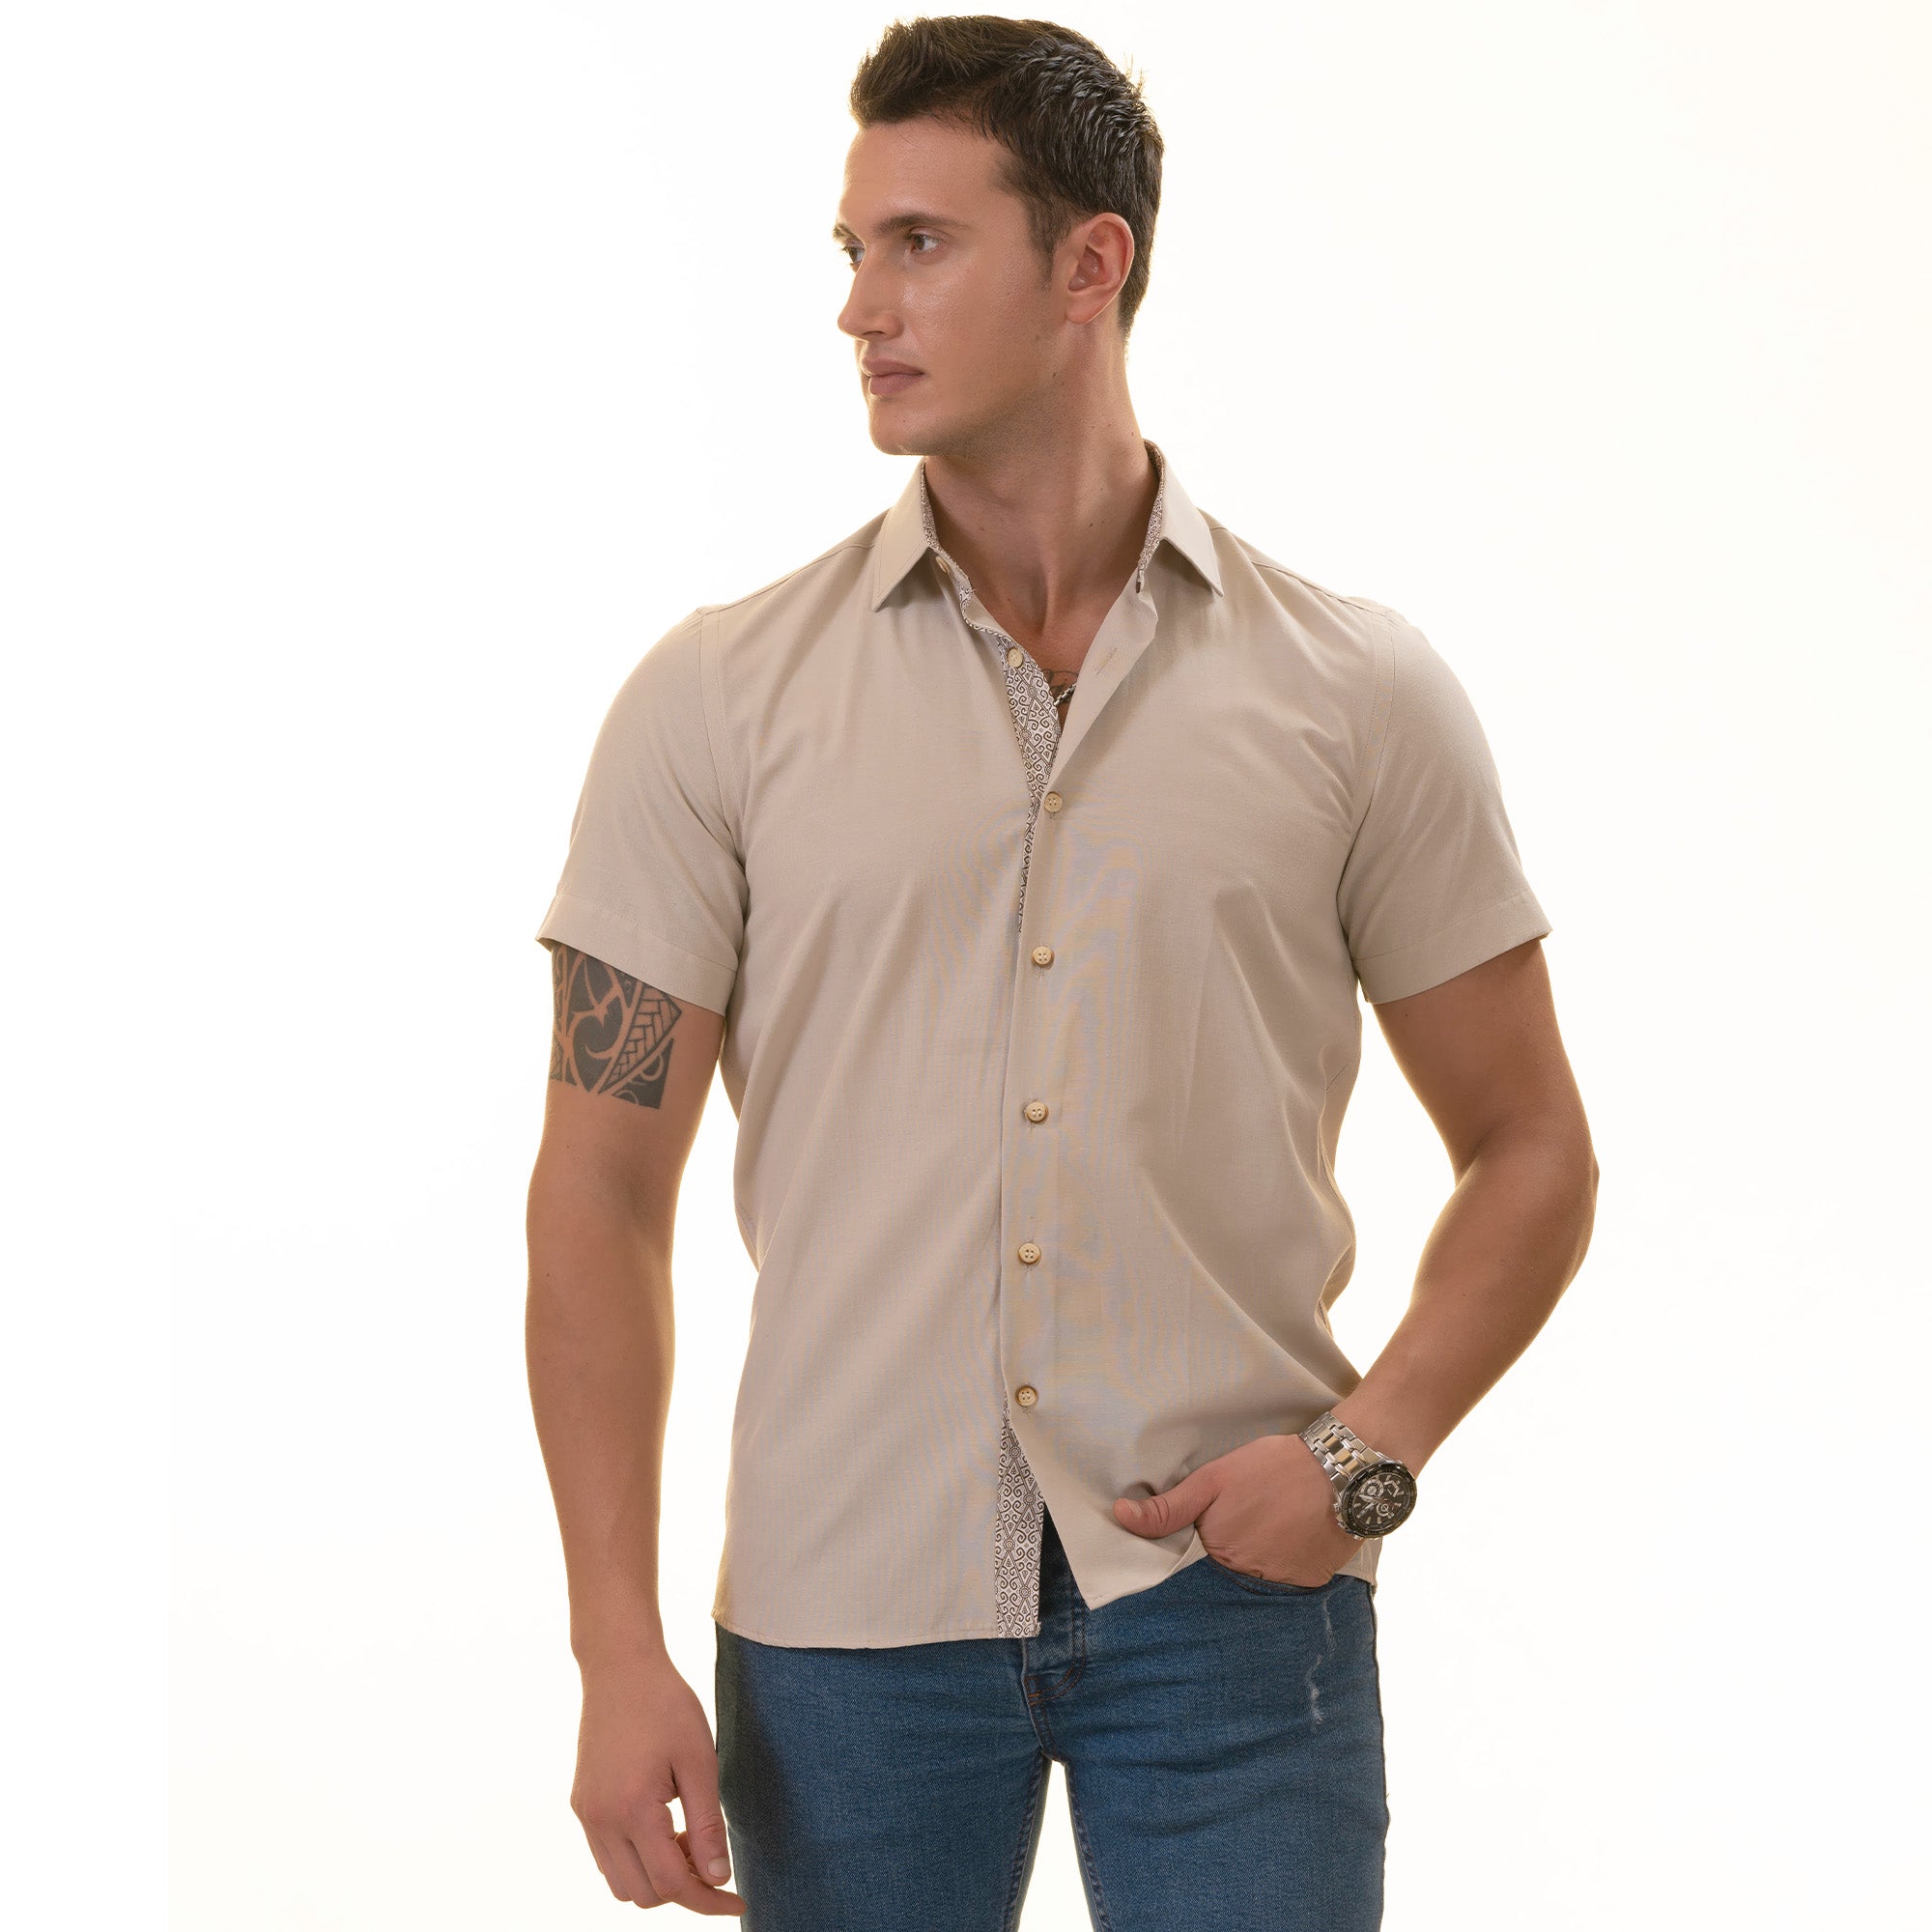 Beige inside different Paisley  Short Sleeve Button up Shirts - Tailored Slim Fit Cotton Dress Shirts